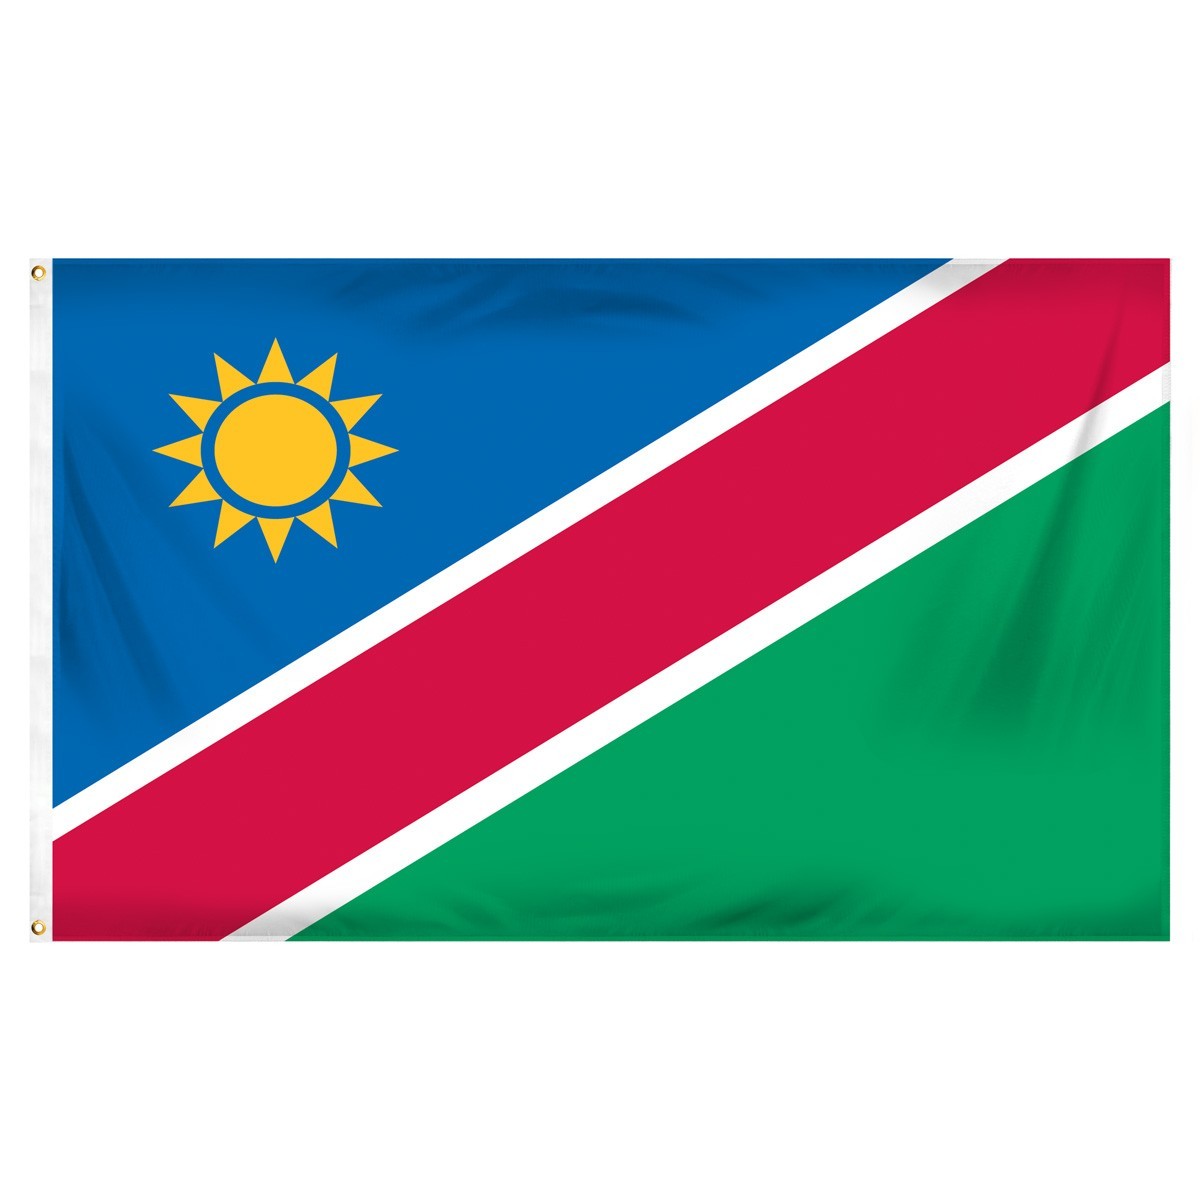 Namibia 3' x 5' Indoor Polyester Flag